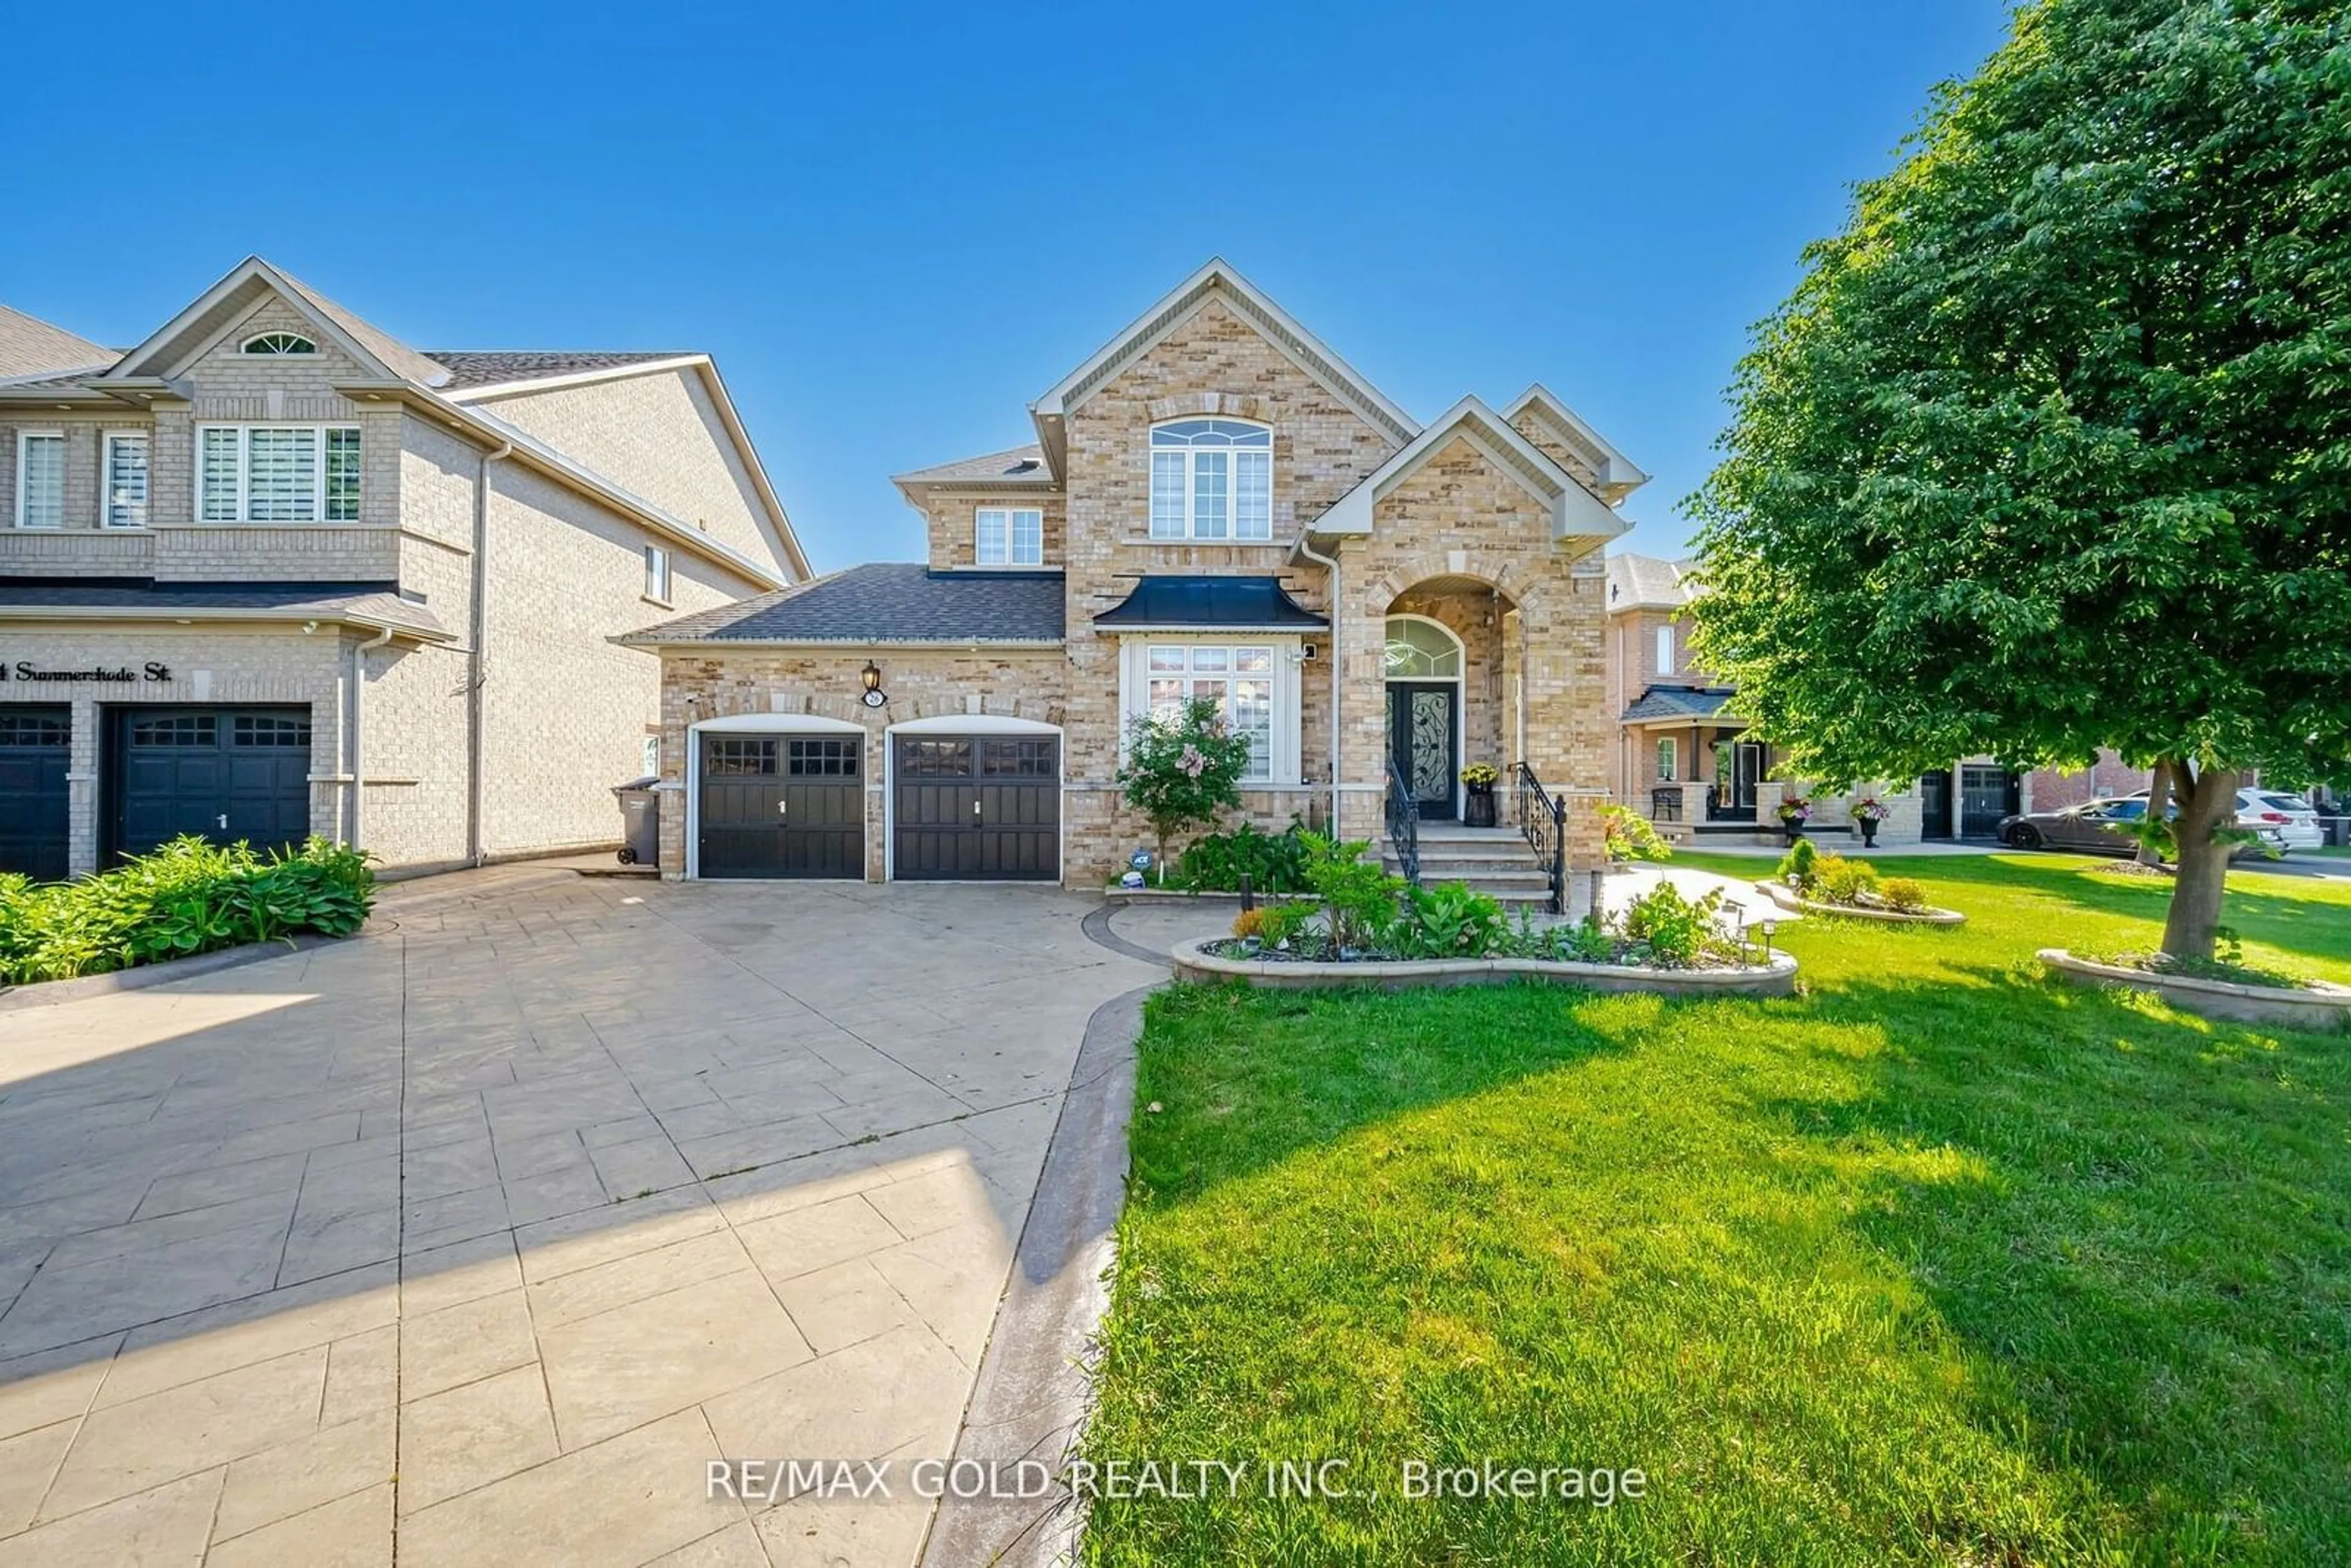 Frontside or backside of a home for 26 Summershade St, Brampton Ontario L6P 2C2